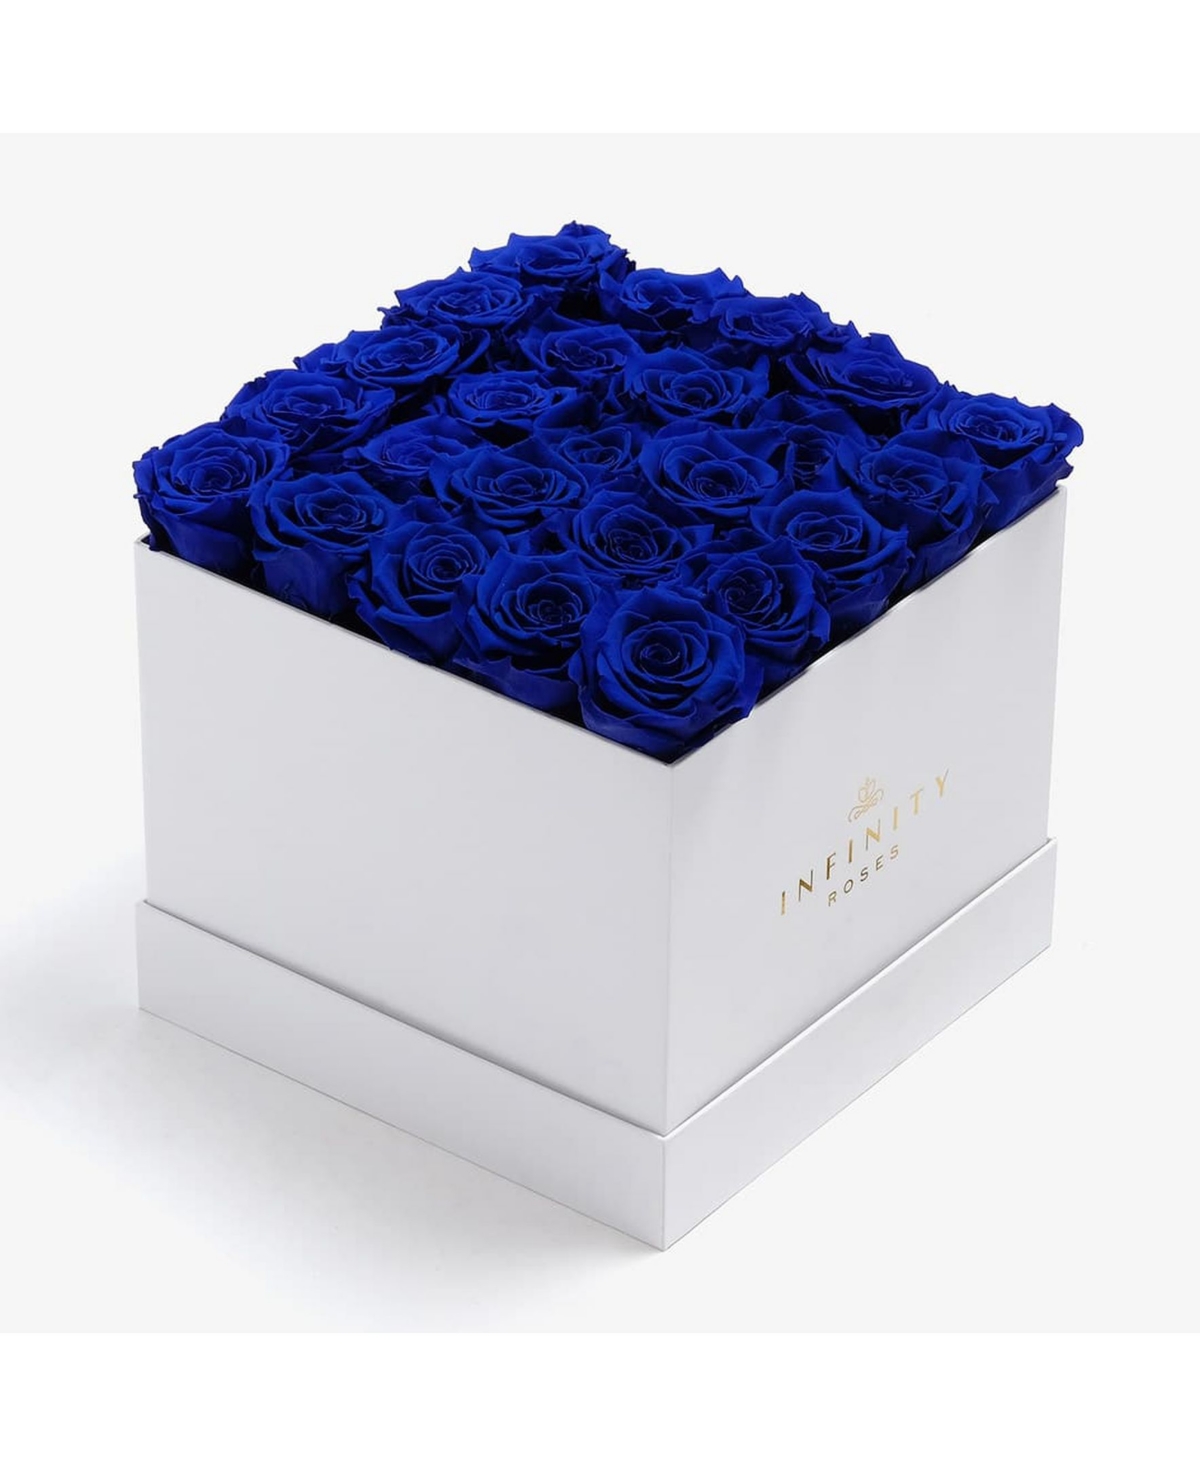 Square Box of 25 Blue Real Roses Preserved to Last Over A Year, Extra Large - Royal Blue